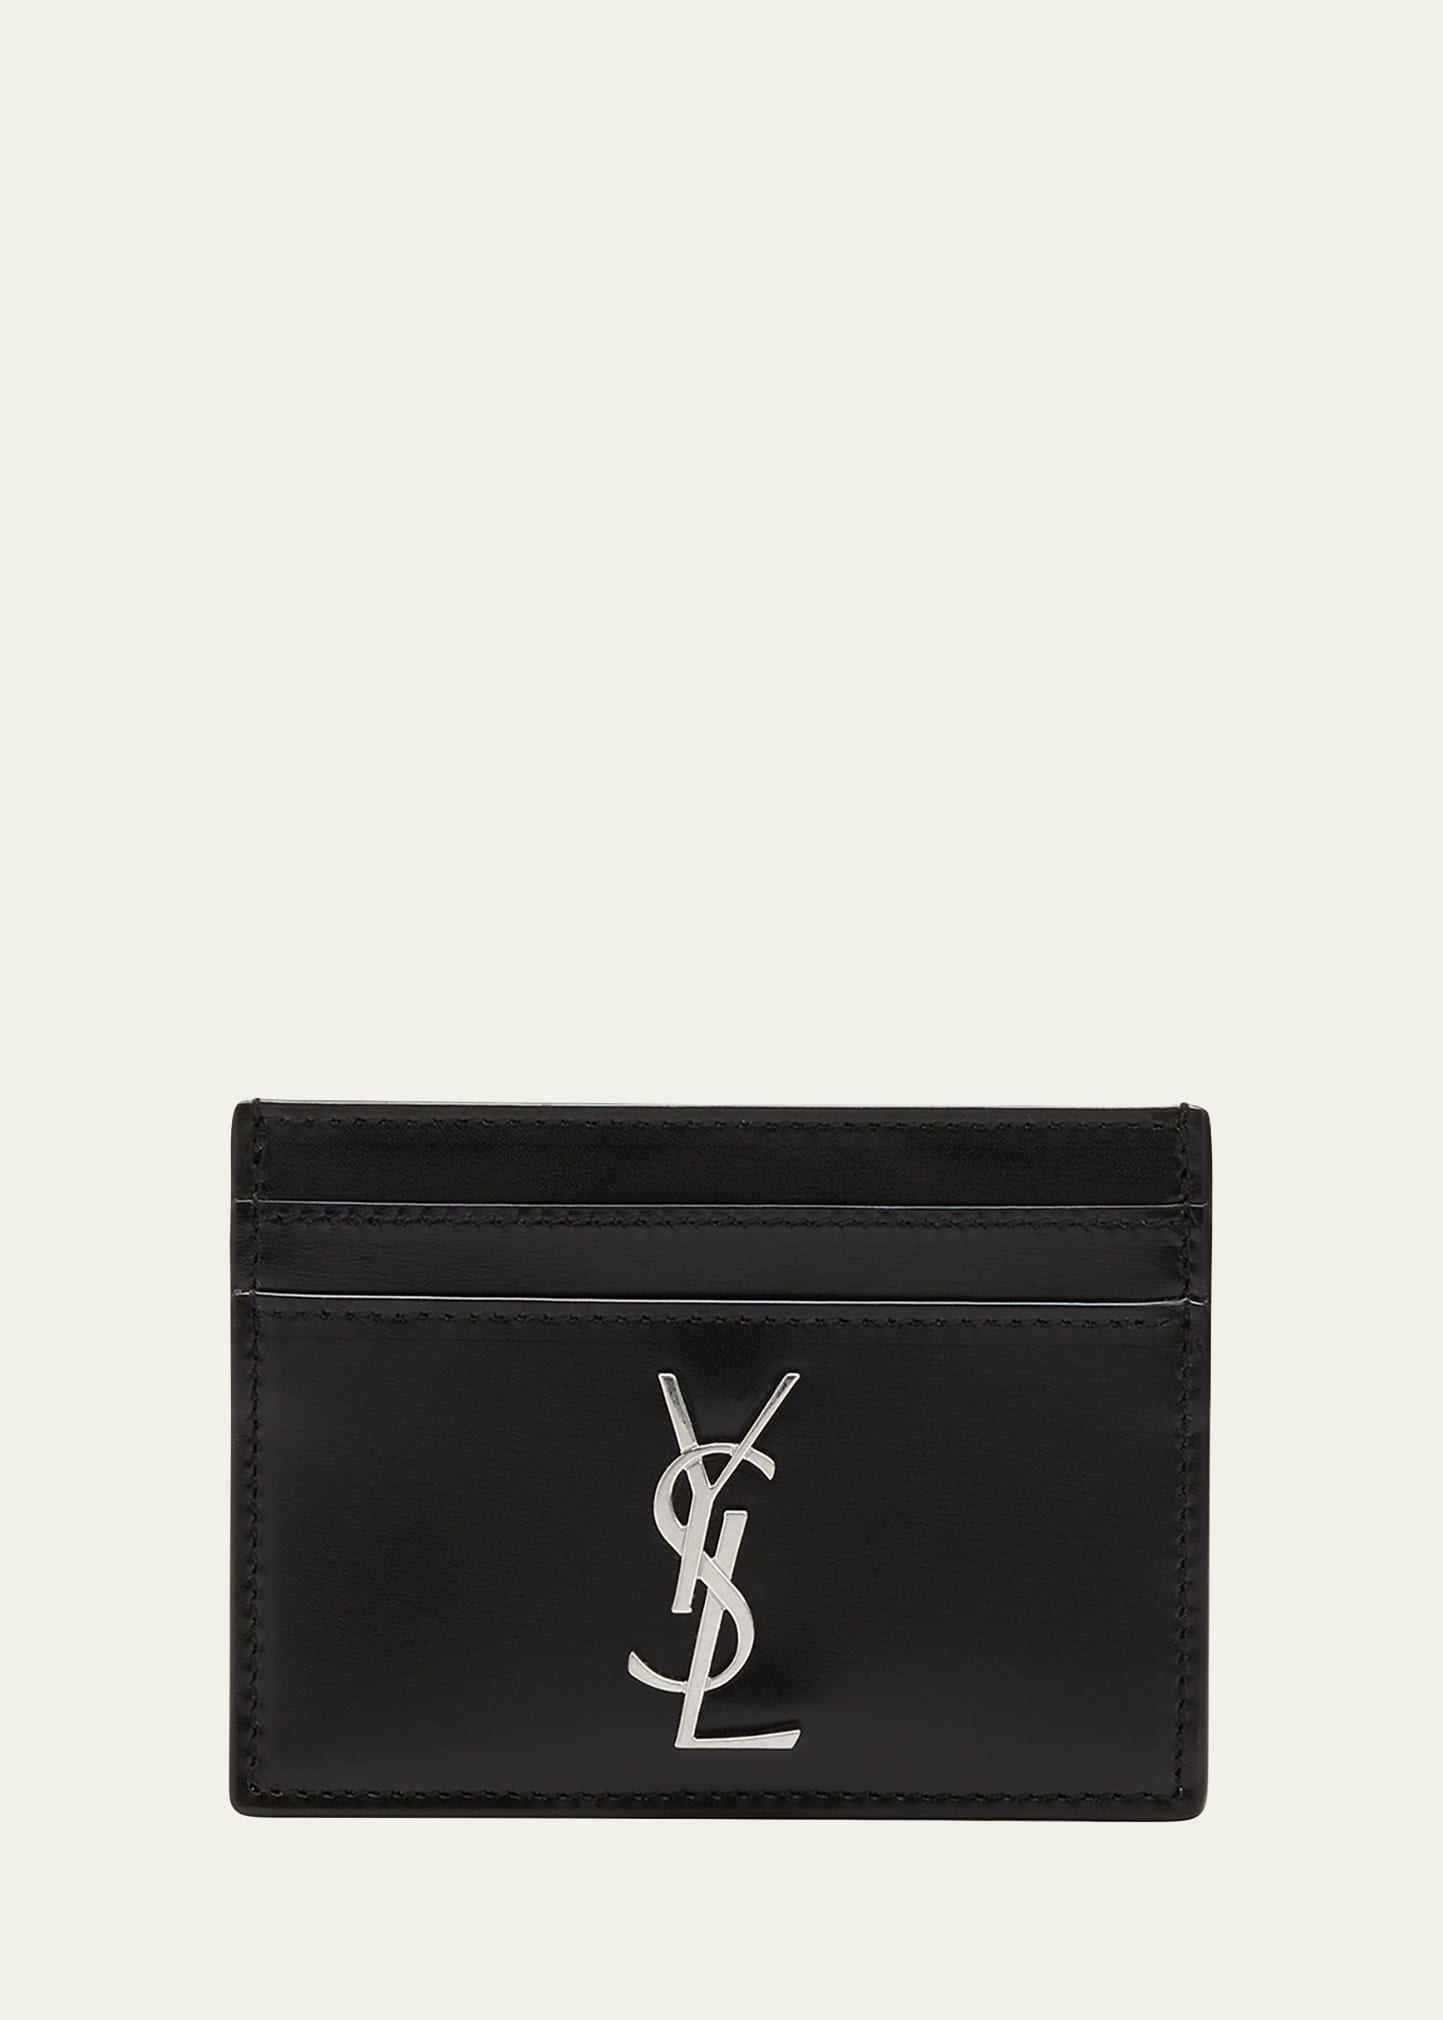 Saint Laurent Monogram Phone Holder with Strap in Smooth Leather